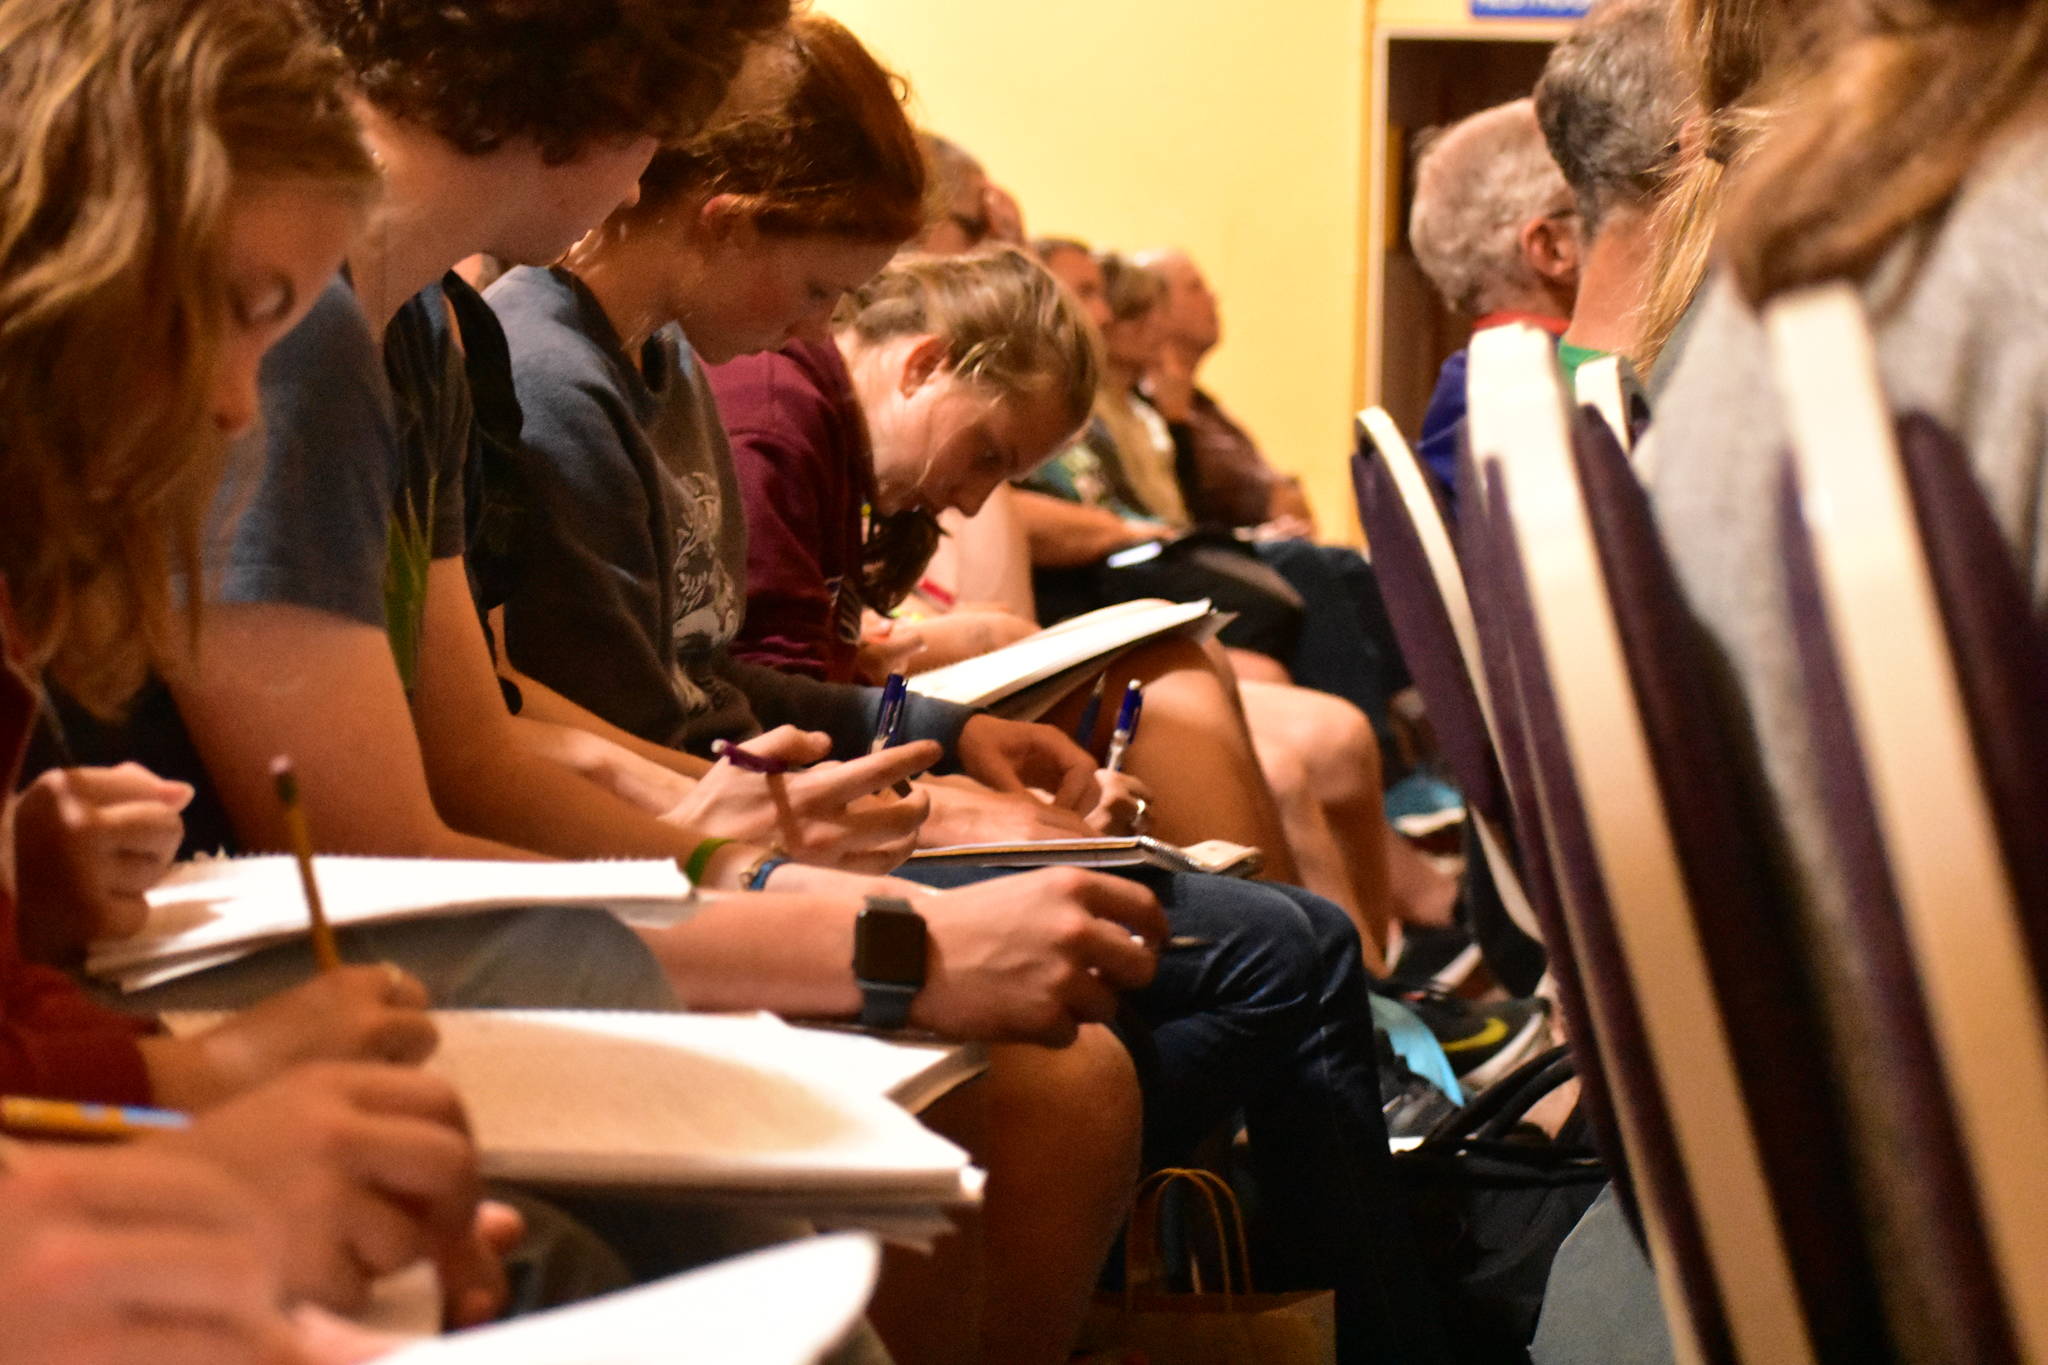 Students take notes during Dan Grossman’s lecture at the Juneau Arts and Humanities Council on Monday, Sept. 9, 2019. (Peter Segall | Juneau Empire)